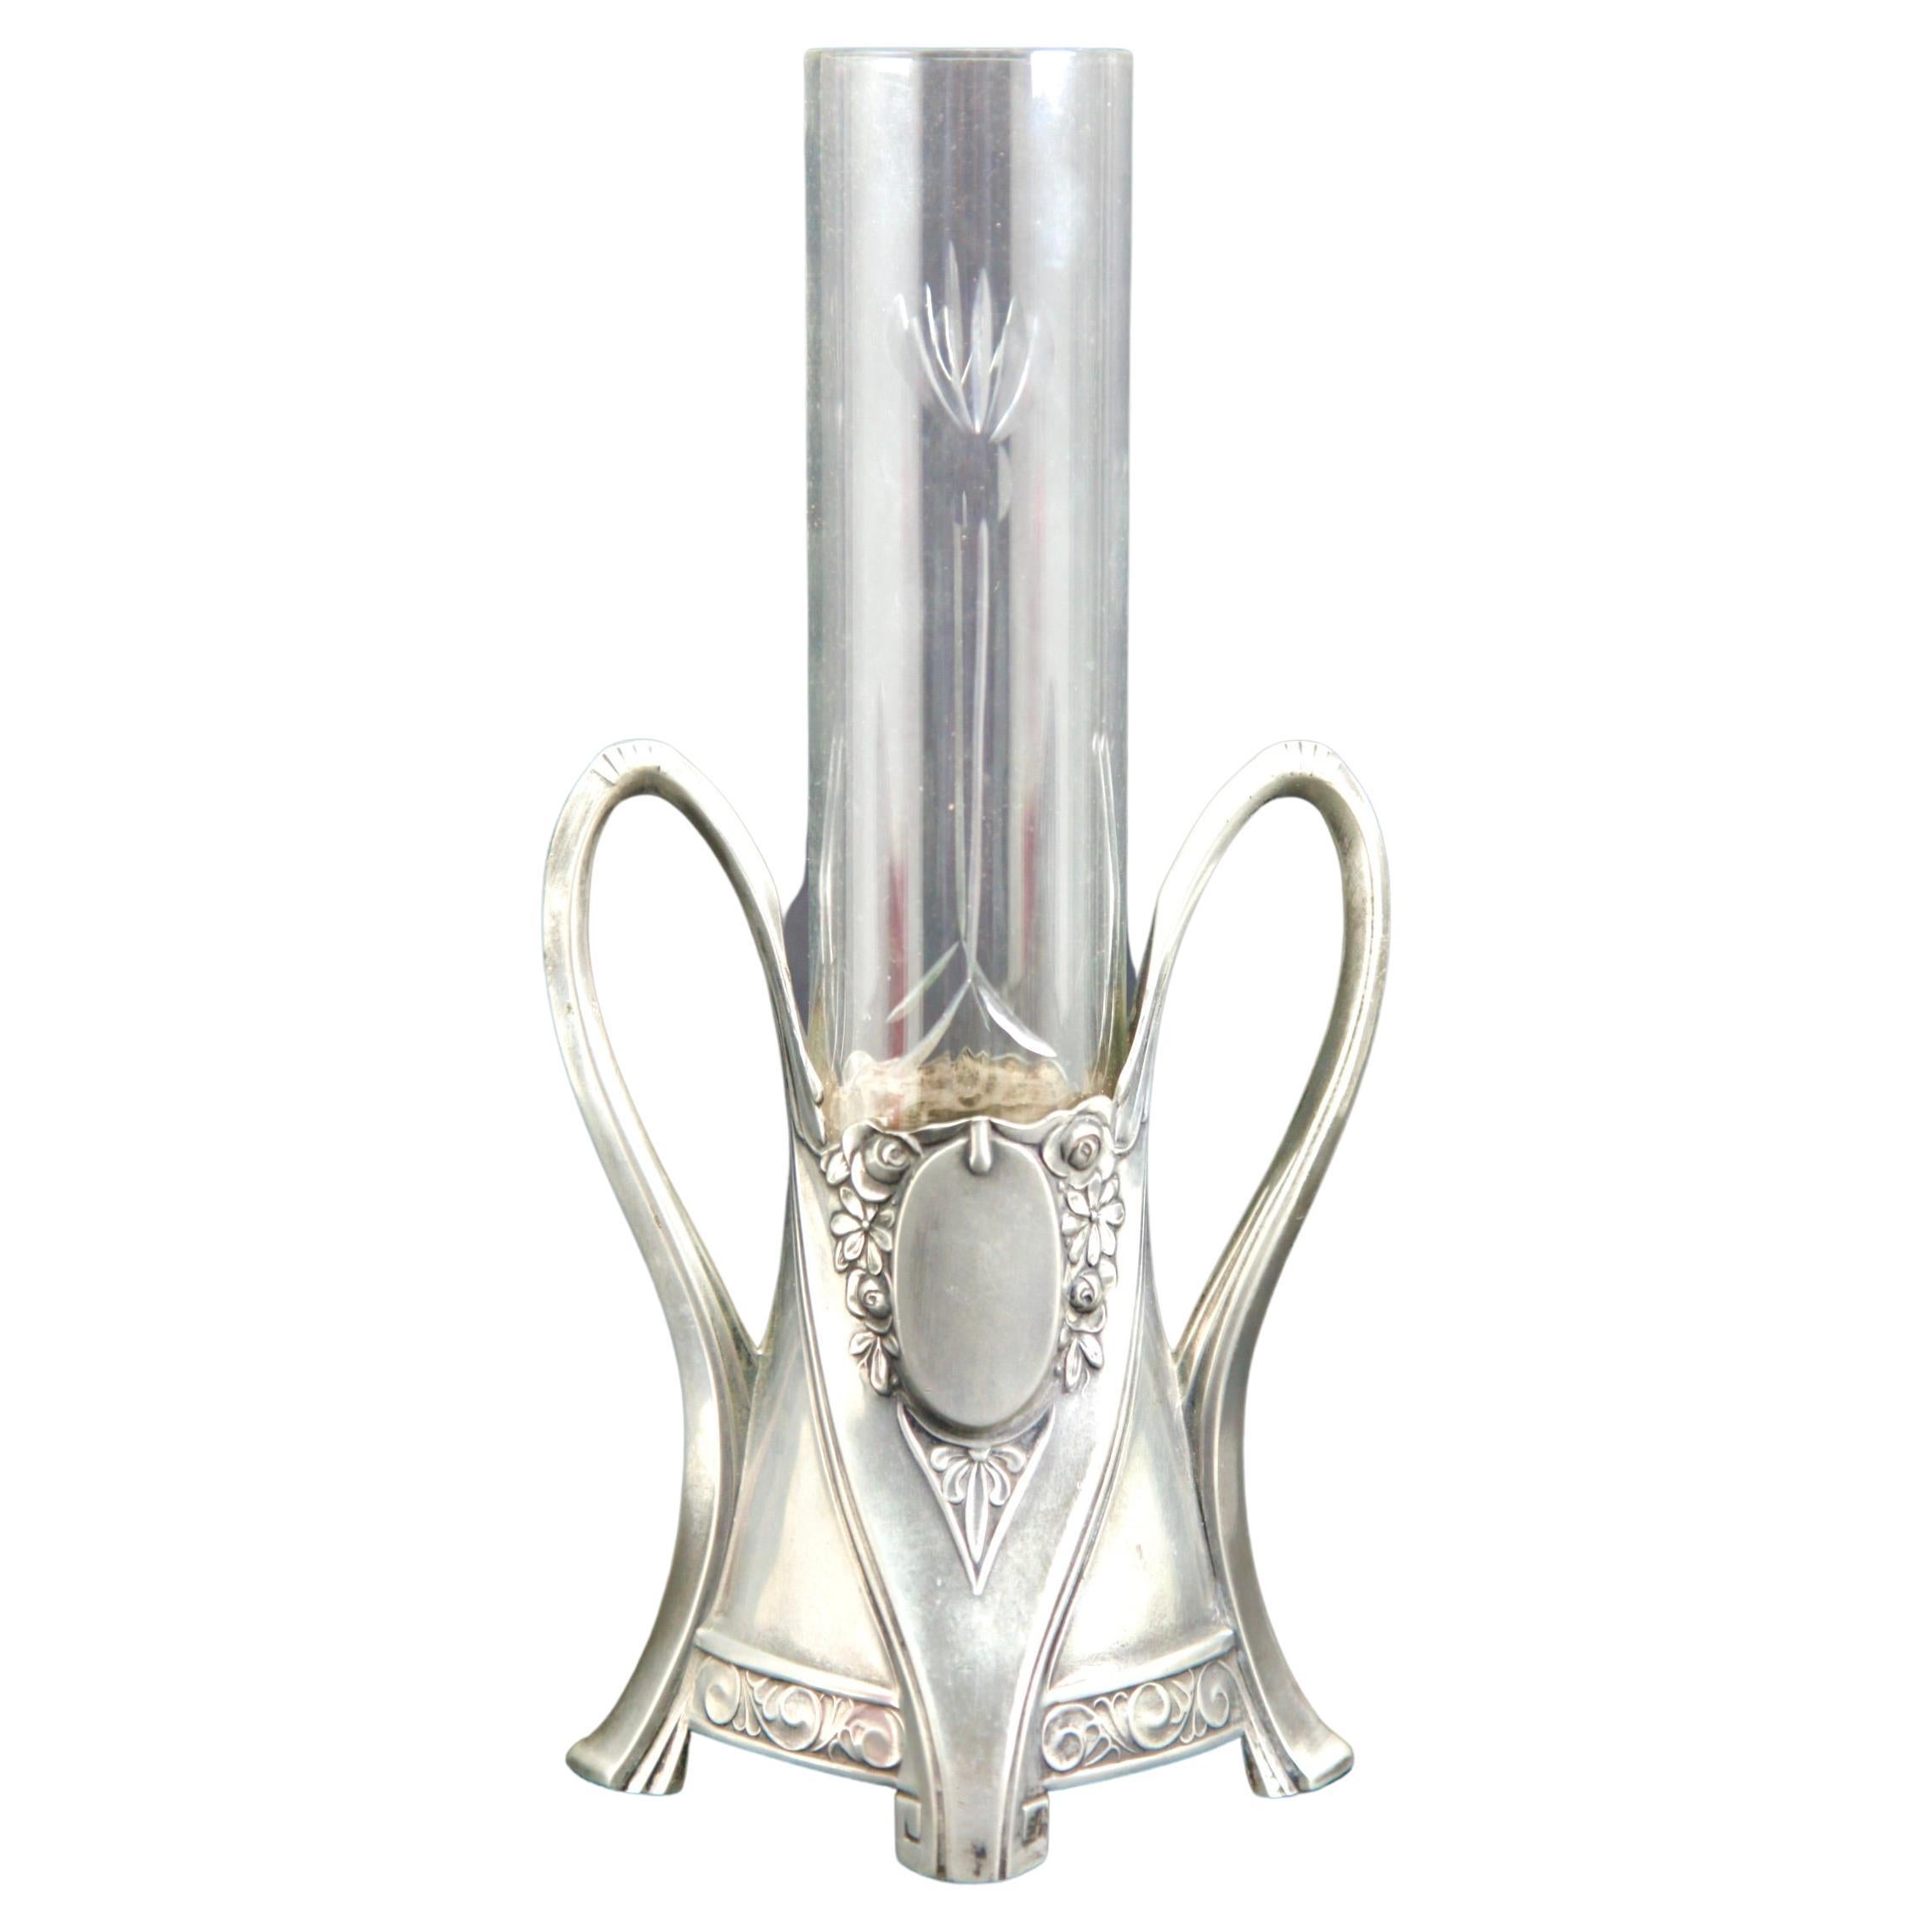 WMF Art Nouveau Sollifleur whit Detailt Claire engraved glass.

The piece is in excellent condition and a real beauty!

Photography fails to capture the beauty of the piece.
?In real-time, it look stunning. ?

Please don't hesitate to get in